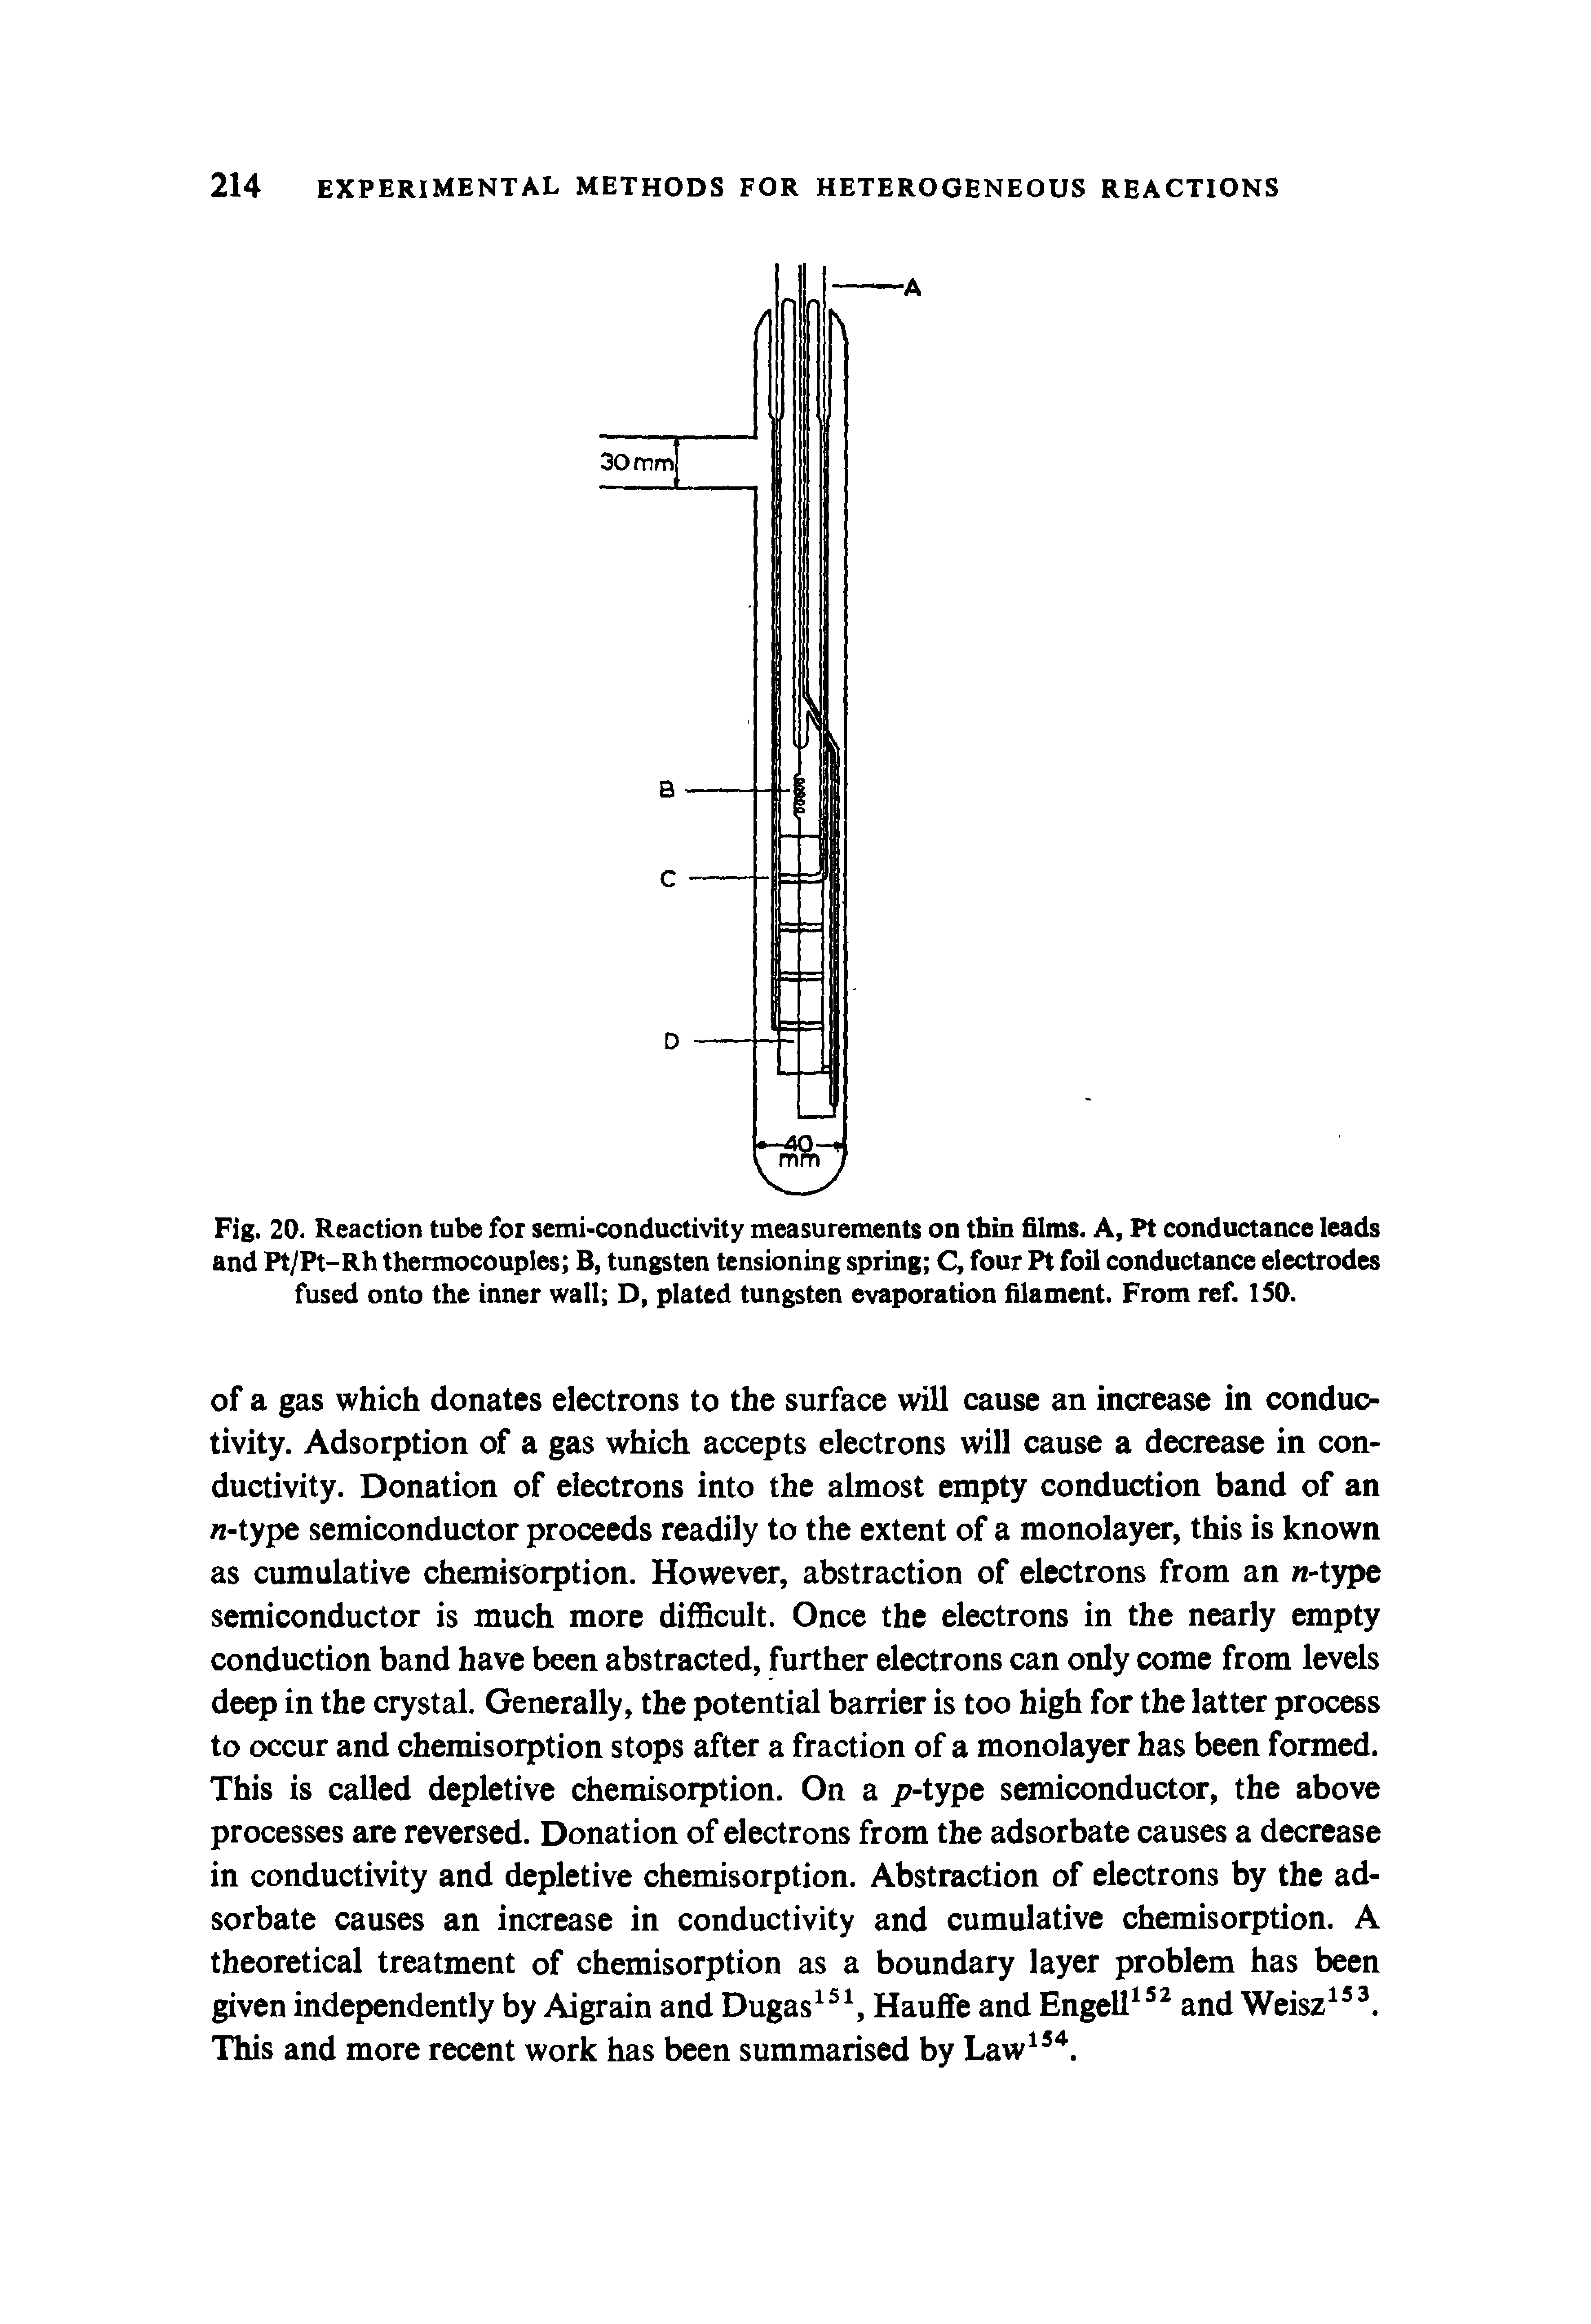 Fig. 20. Reaction tube for semi-conductivity measurements on thin films. A, Pt conductance leads and Pt/Pt-Rh thermocouples B, tungsten tensioning spring C, four Pt foil conductance electrodes fused onto the inner wall D, plated tungsten evaporation filament. From ref. 150.